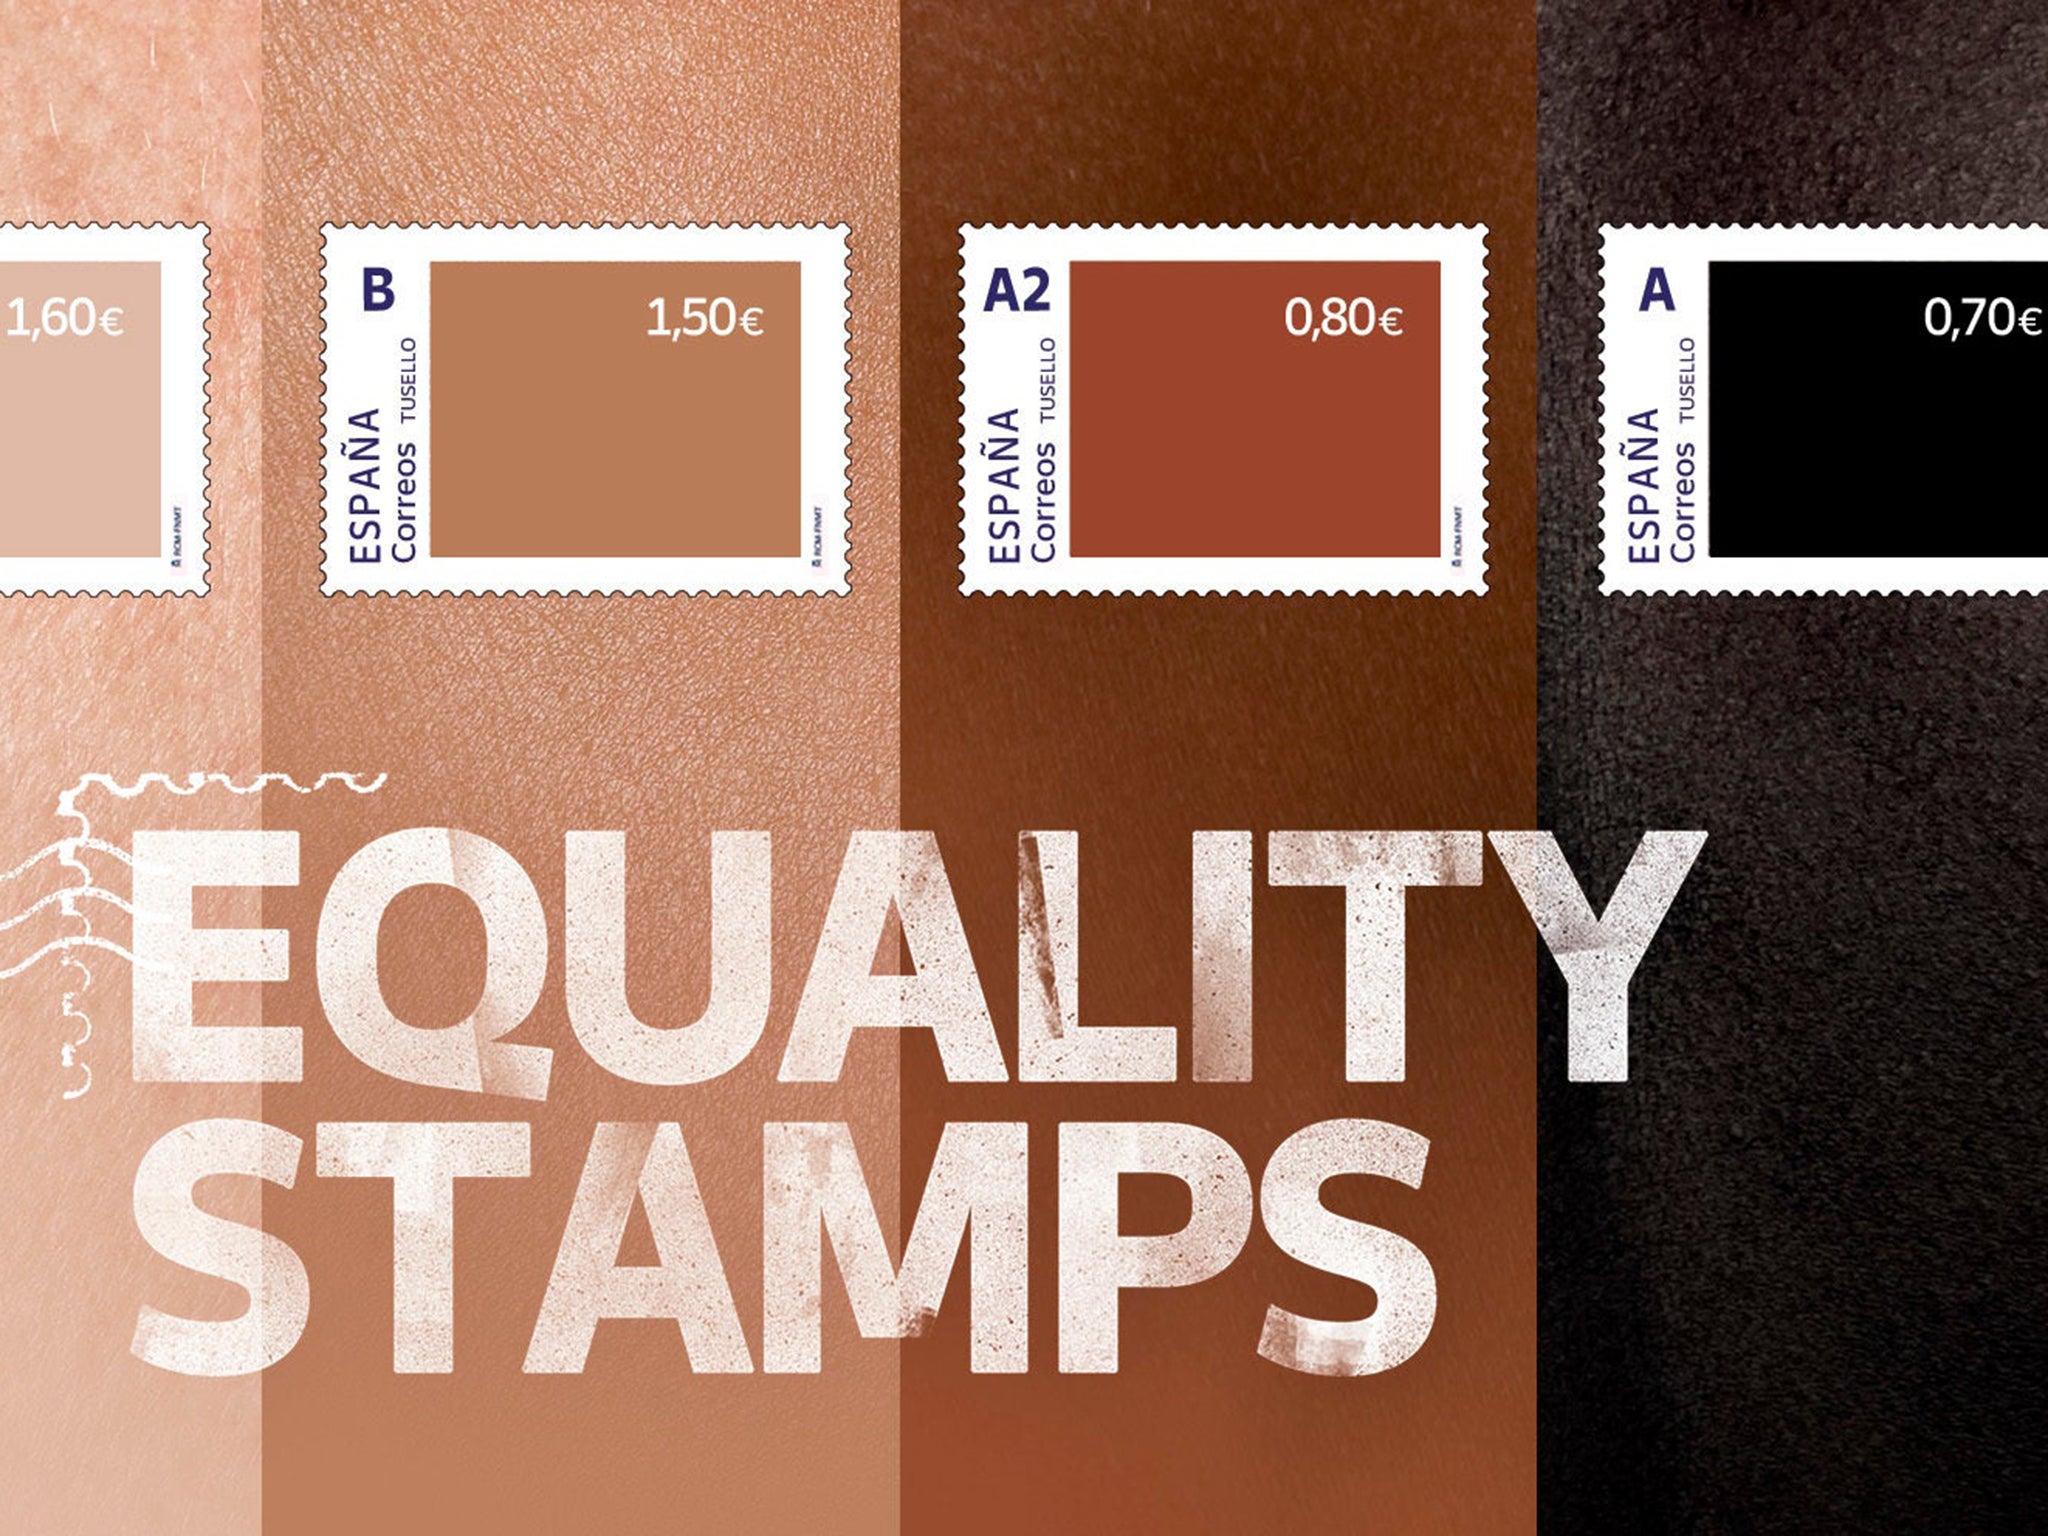 The set of four stamps to signify different skin-colored tones